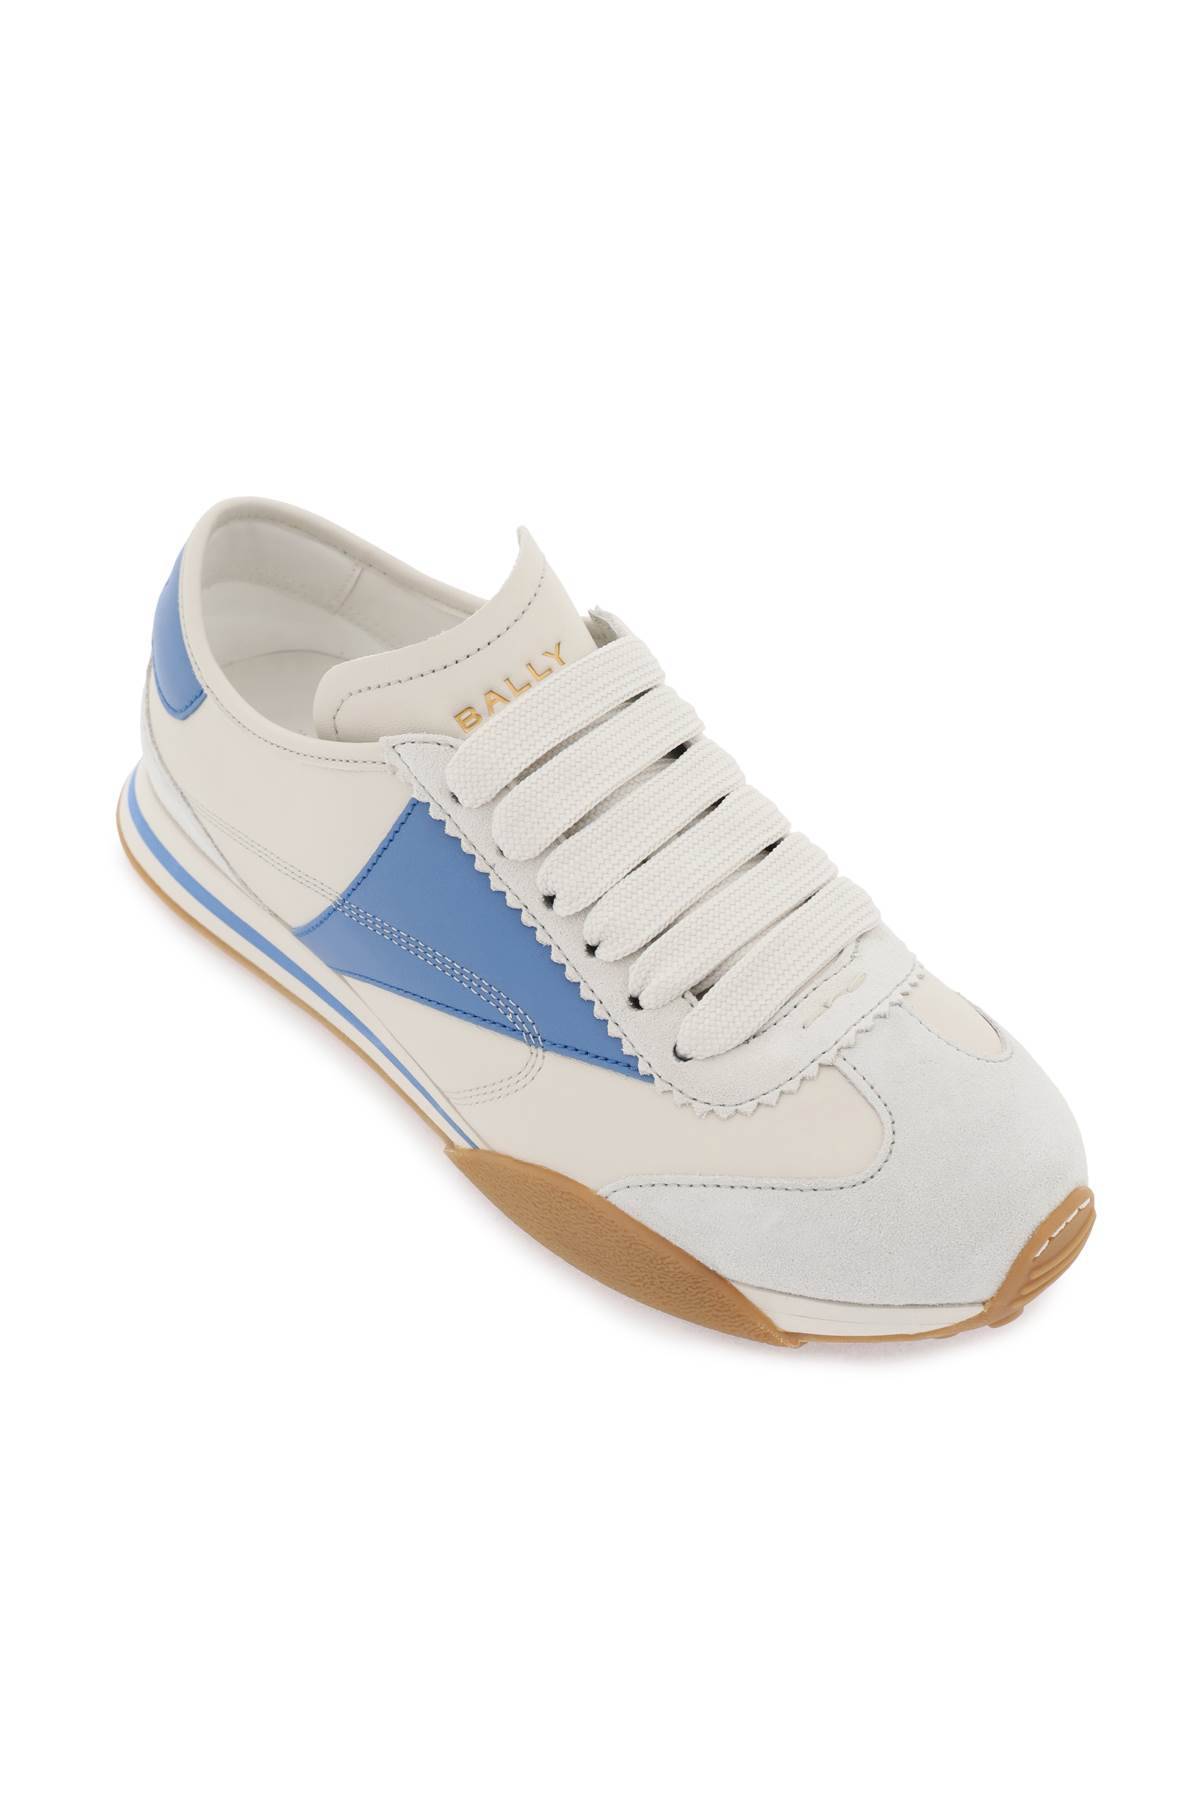 Shop Bally Leather Sonney Sneakers In Grey,blue